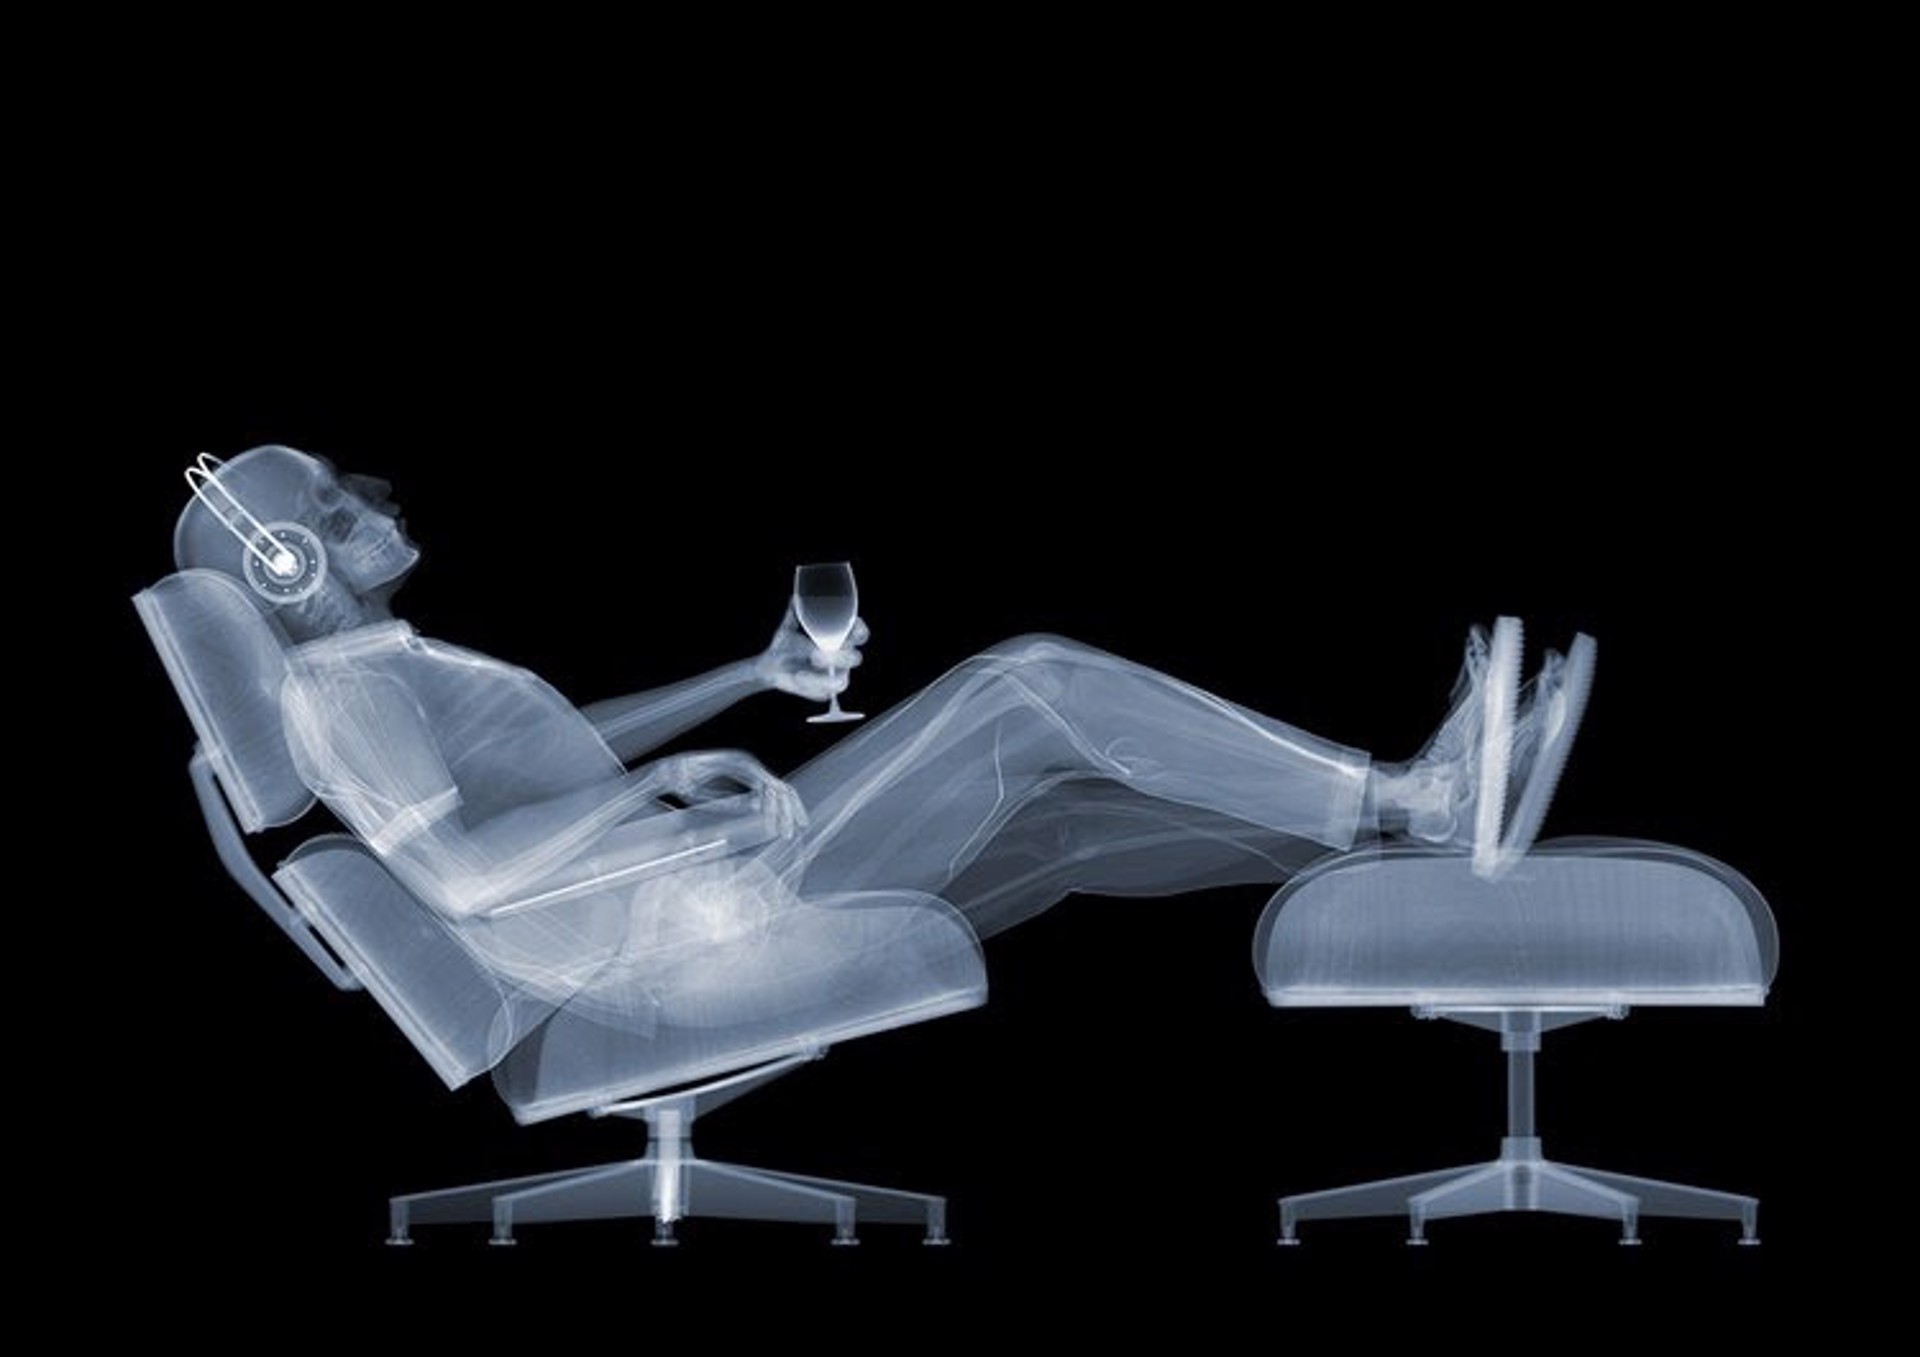 Eames Chillin by Nick Veasey